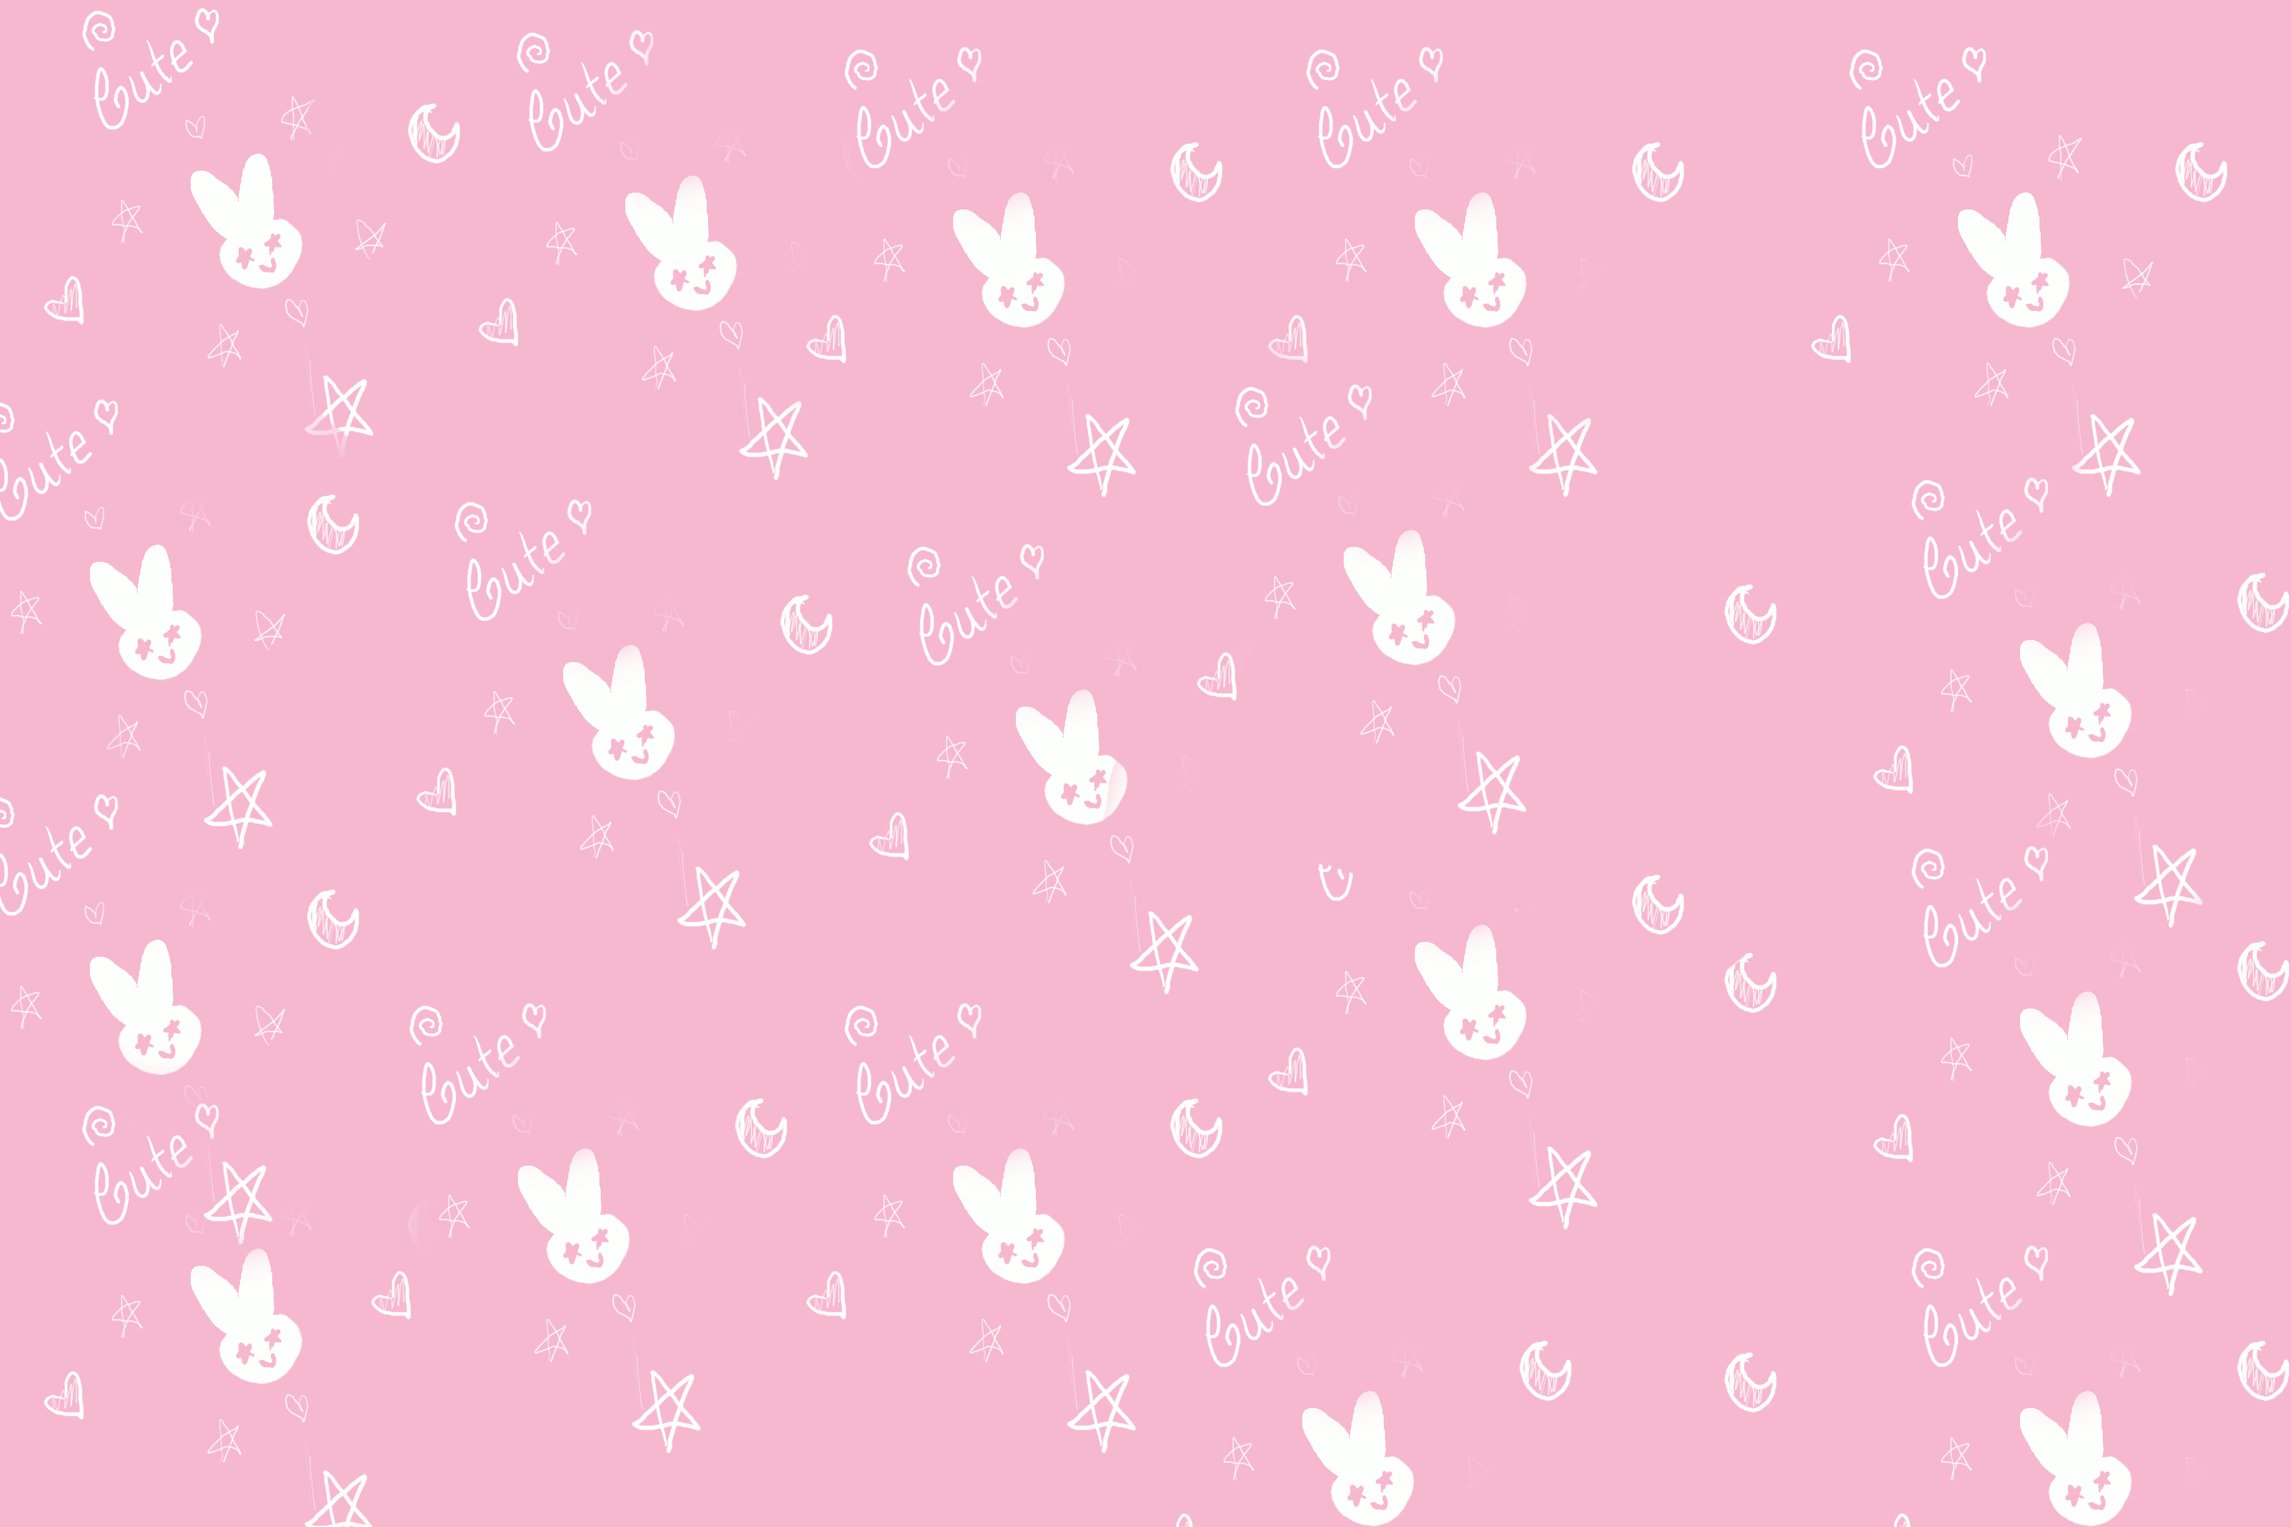 Free download cute pink baby by volframia20 [2291x1527] for your Desktop, Mobile & Tablet. Explore Cute Pink Wallpaper Image. Free Pink Wallpaper Downloads, Cute Pink Wallpaper for Girls, Cute